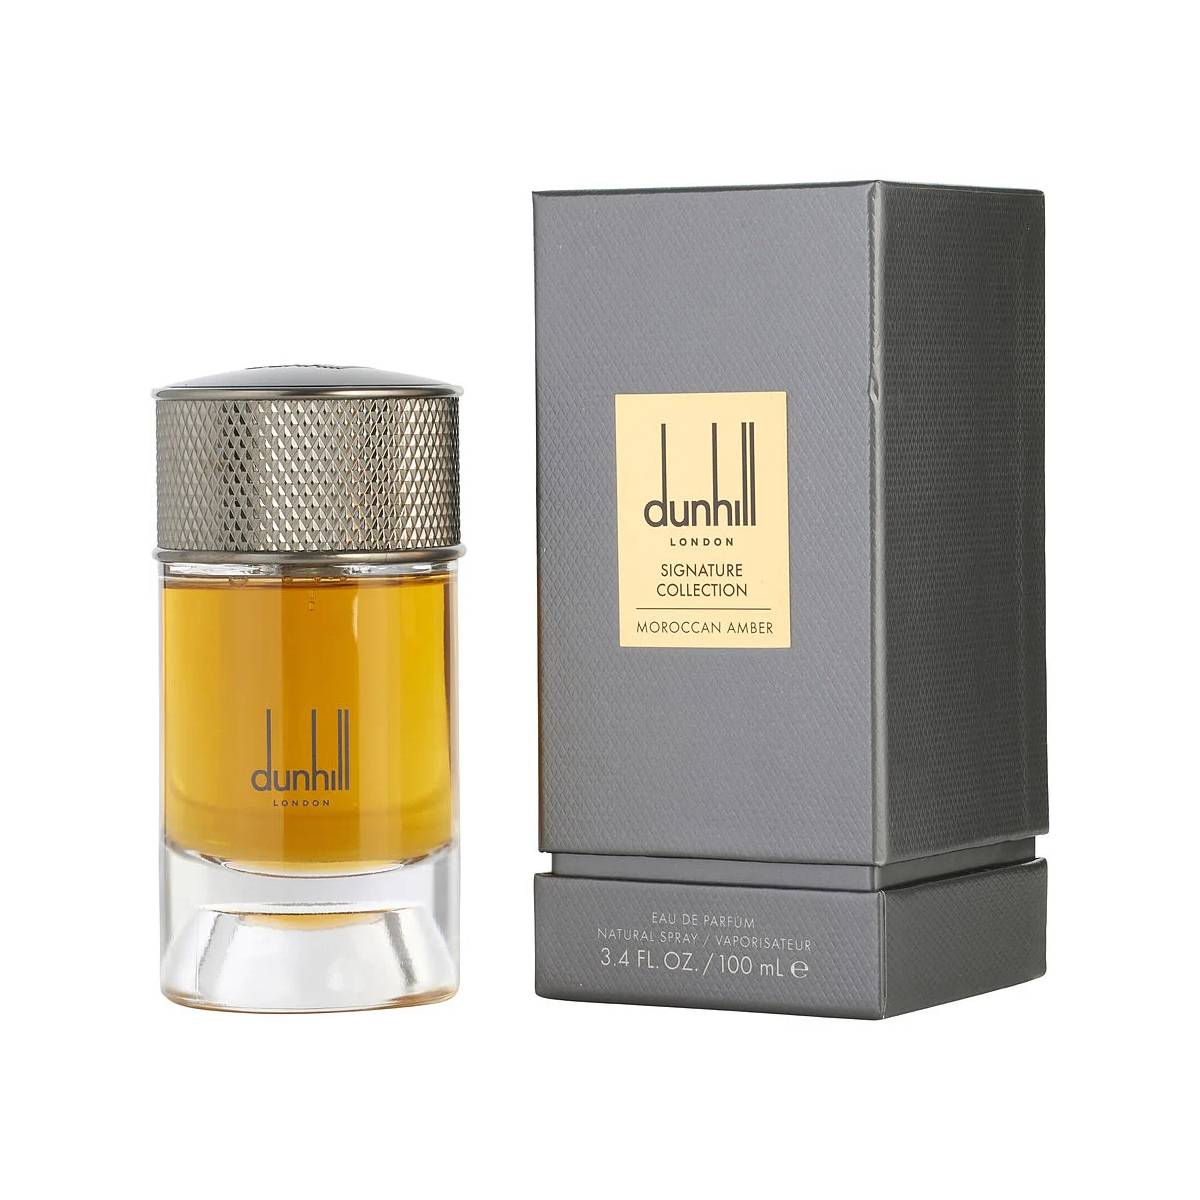 Dunhill Signature Collection Moroccan Amber Edp 100ml